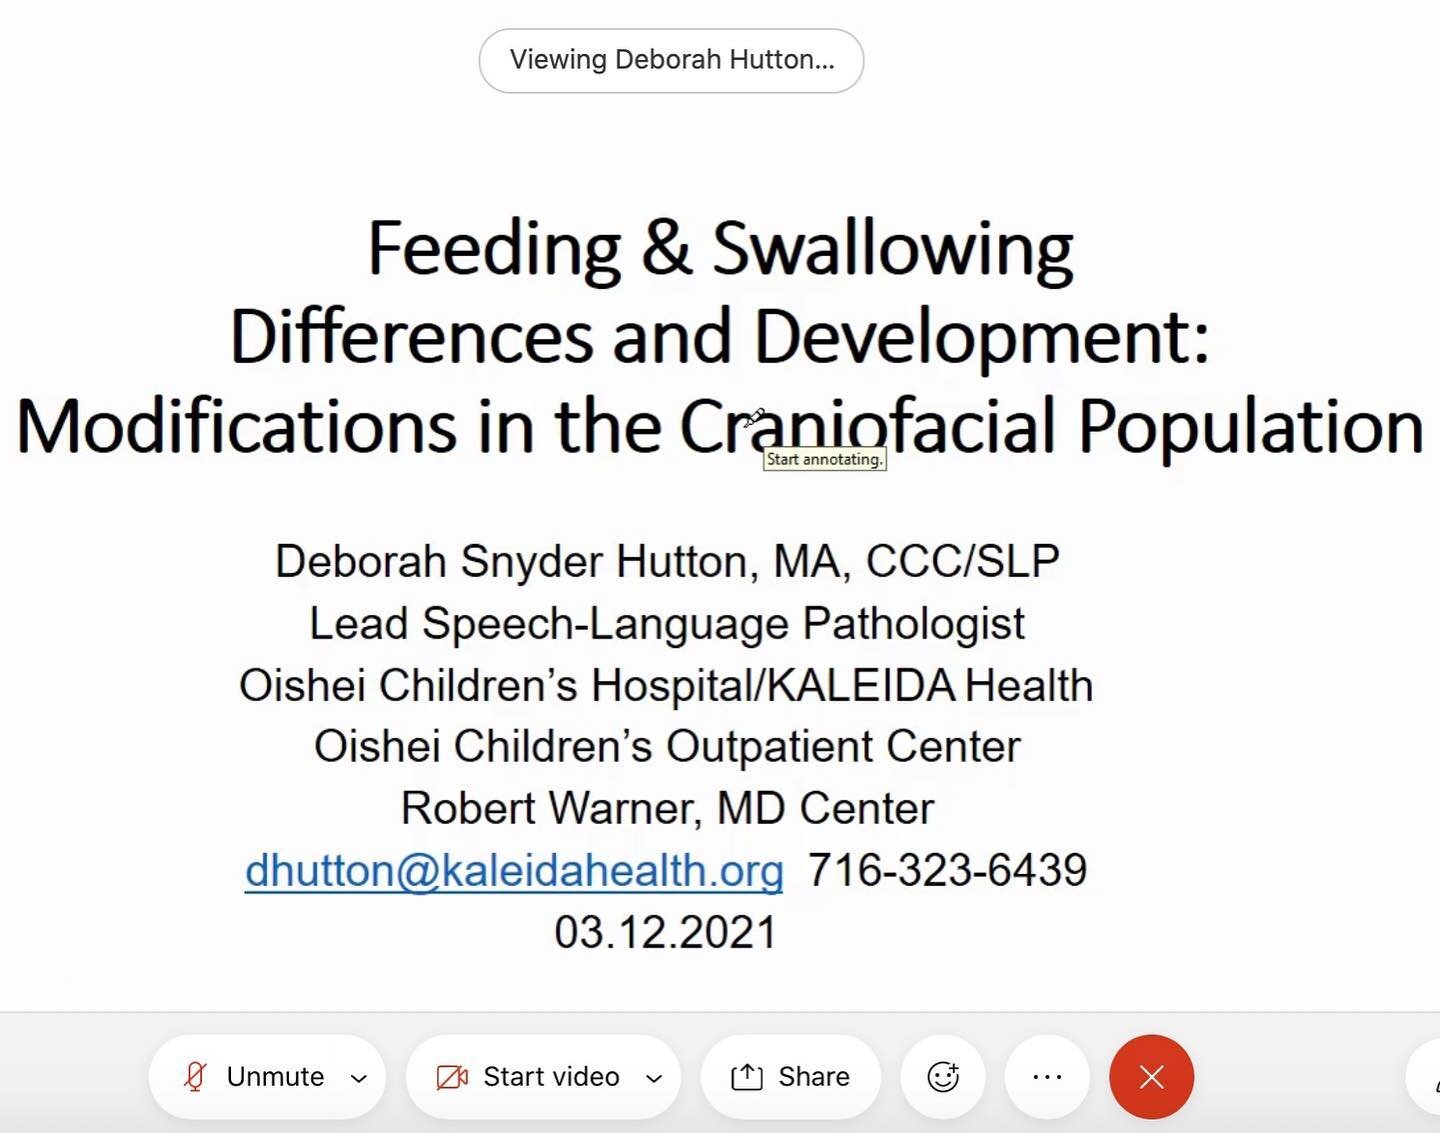 Wonderful monthly Craniofacial conference talk from our Clinical Lead Speech-Language Pathologist, Deborah Snyder Hutton, MA, CCC/SLP at Oishei Children&rsquo;s Hospital on &ldquo;Feeding &amp; Swallowing Differences and Development: Modifications in